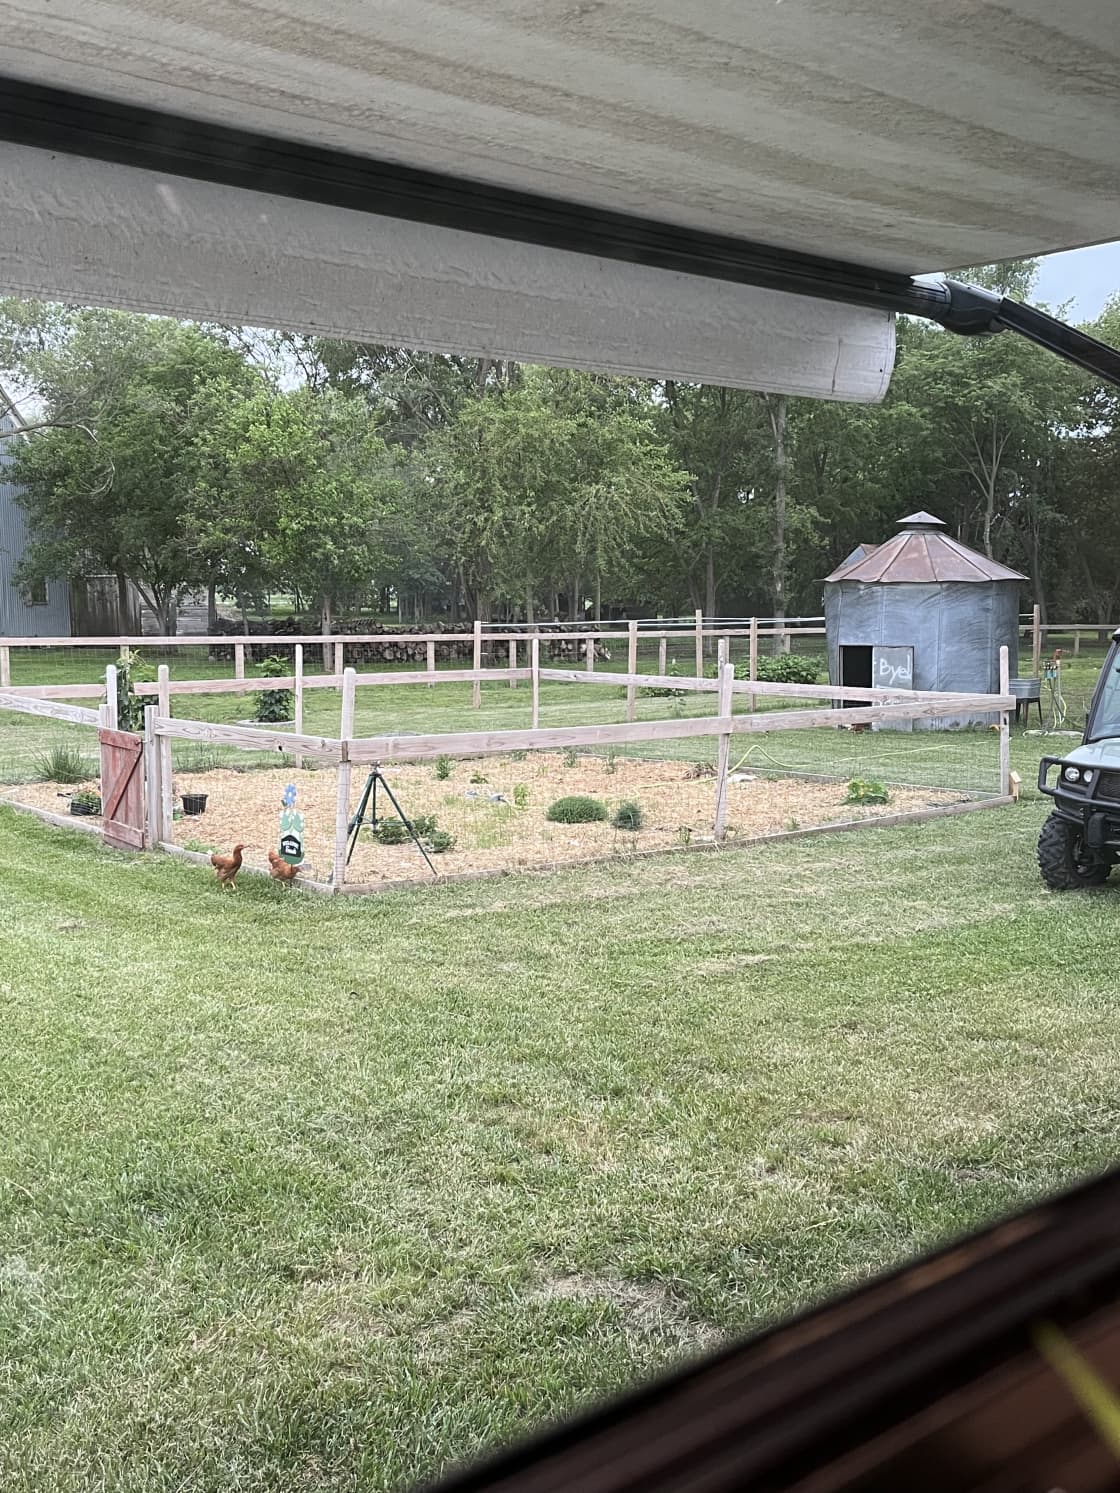 Your view of our garden and maybe our chickens. Photo taken in early June. Site #1.